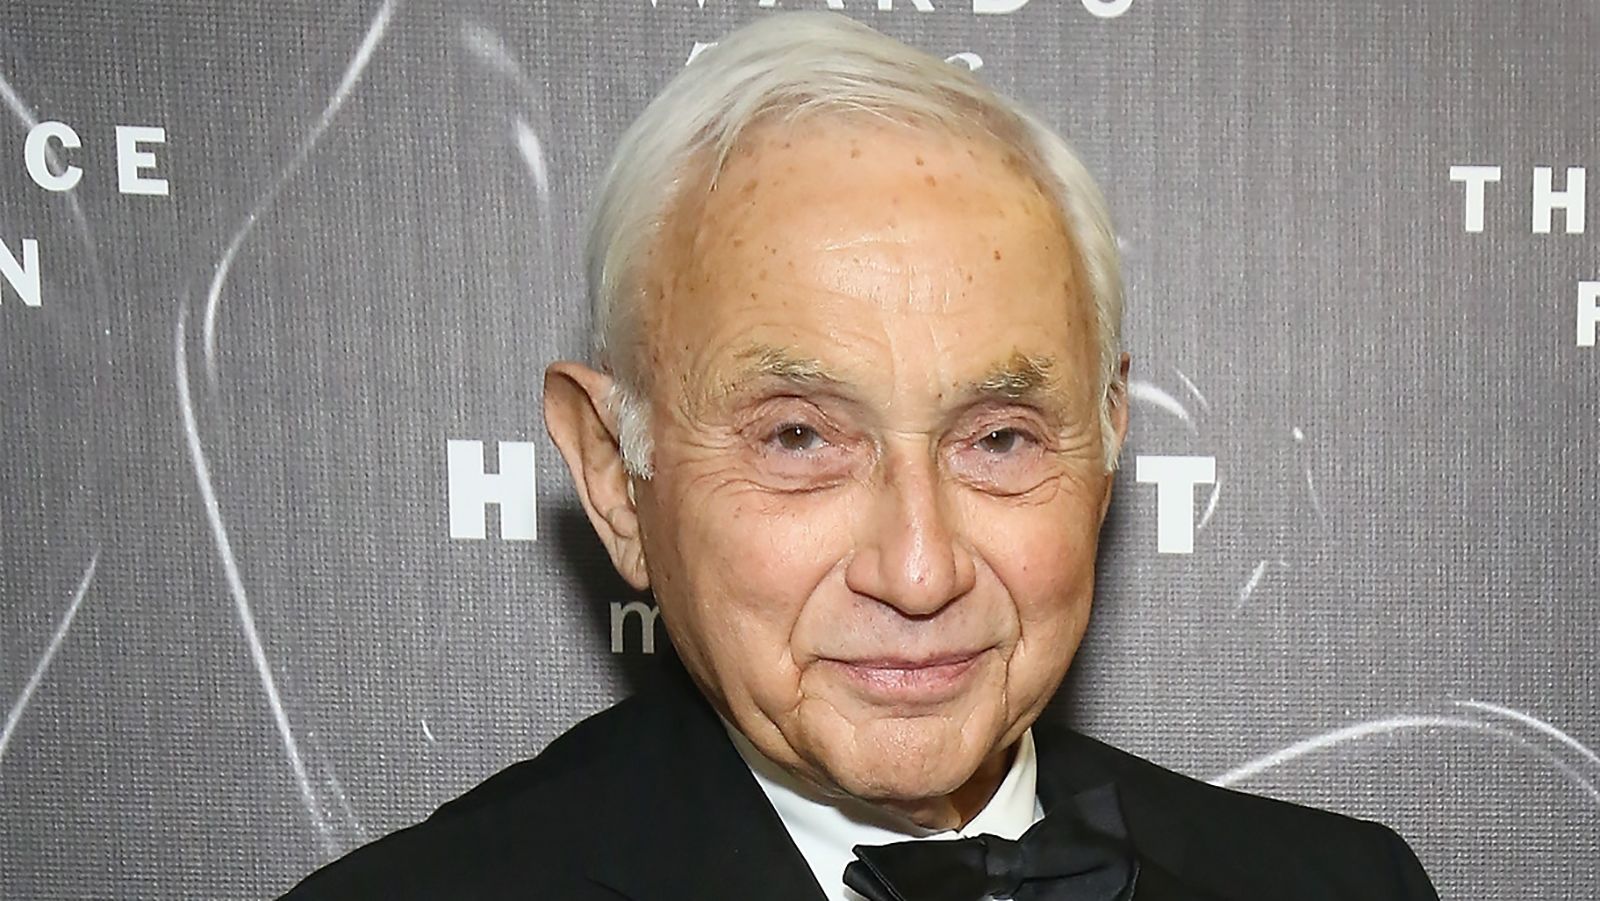 Virginia Giuffre Accuses Les Wexner Of Sex Trafficking In Newly Unsealed Documents